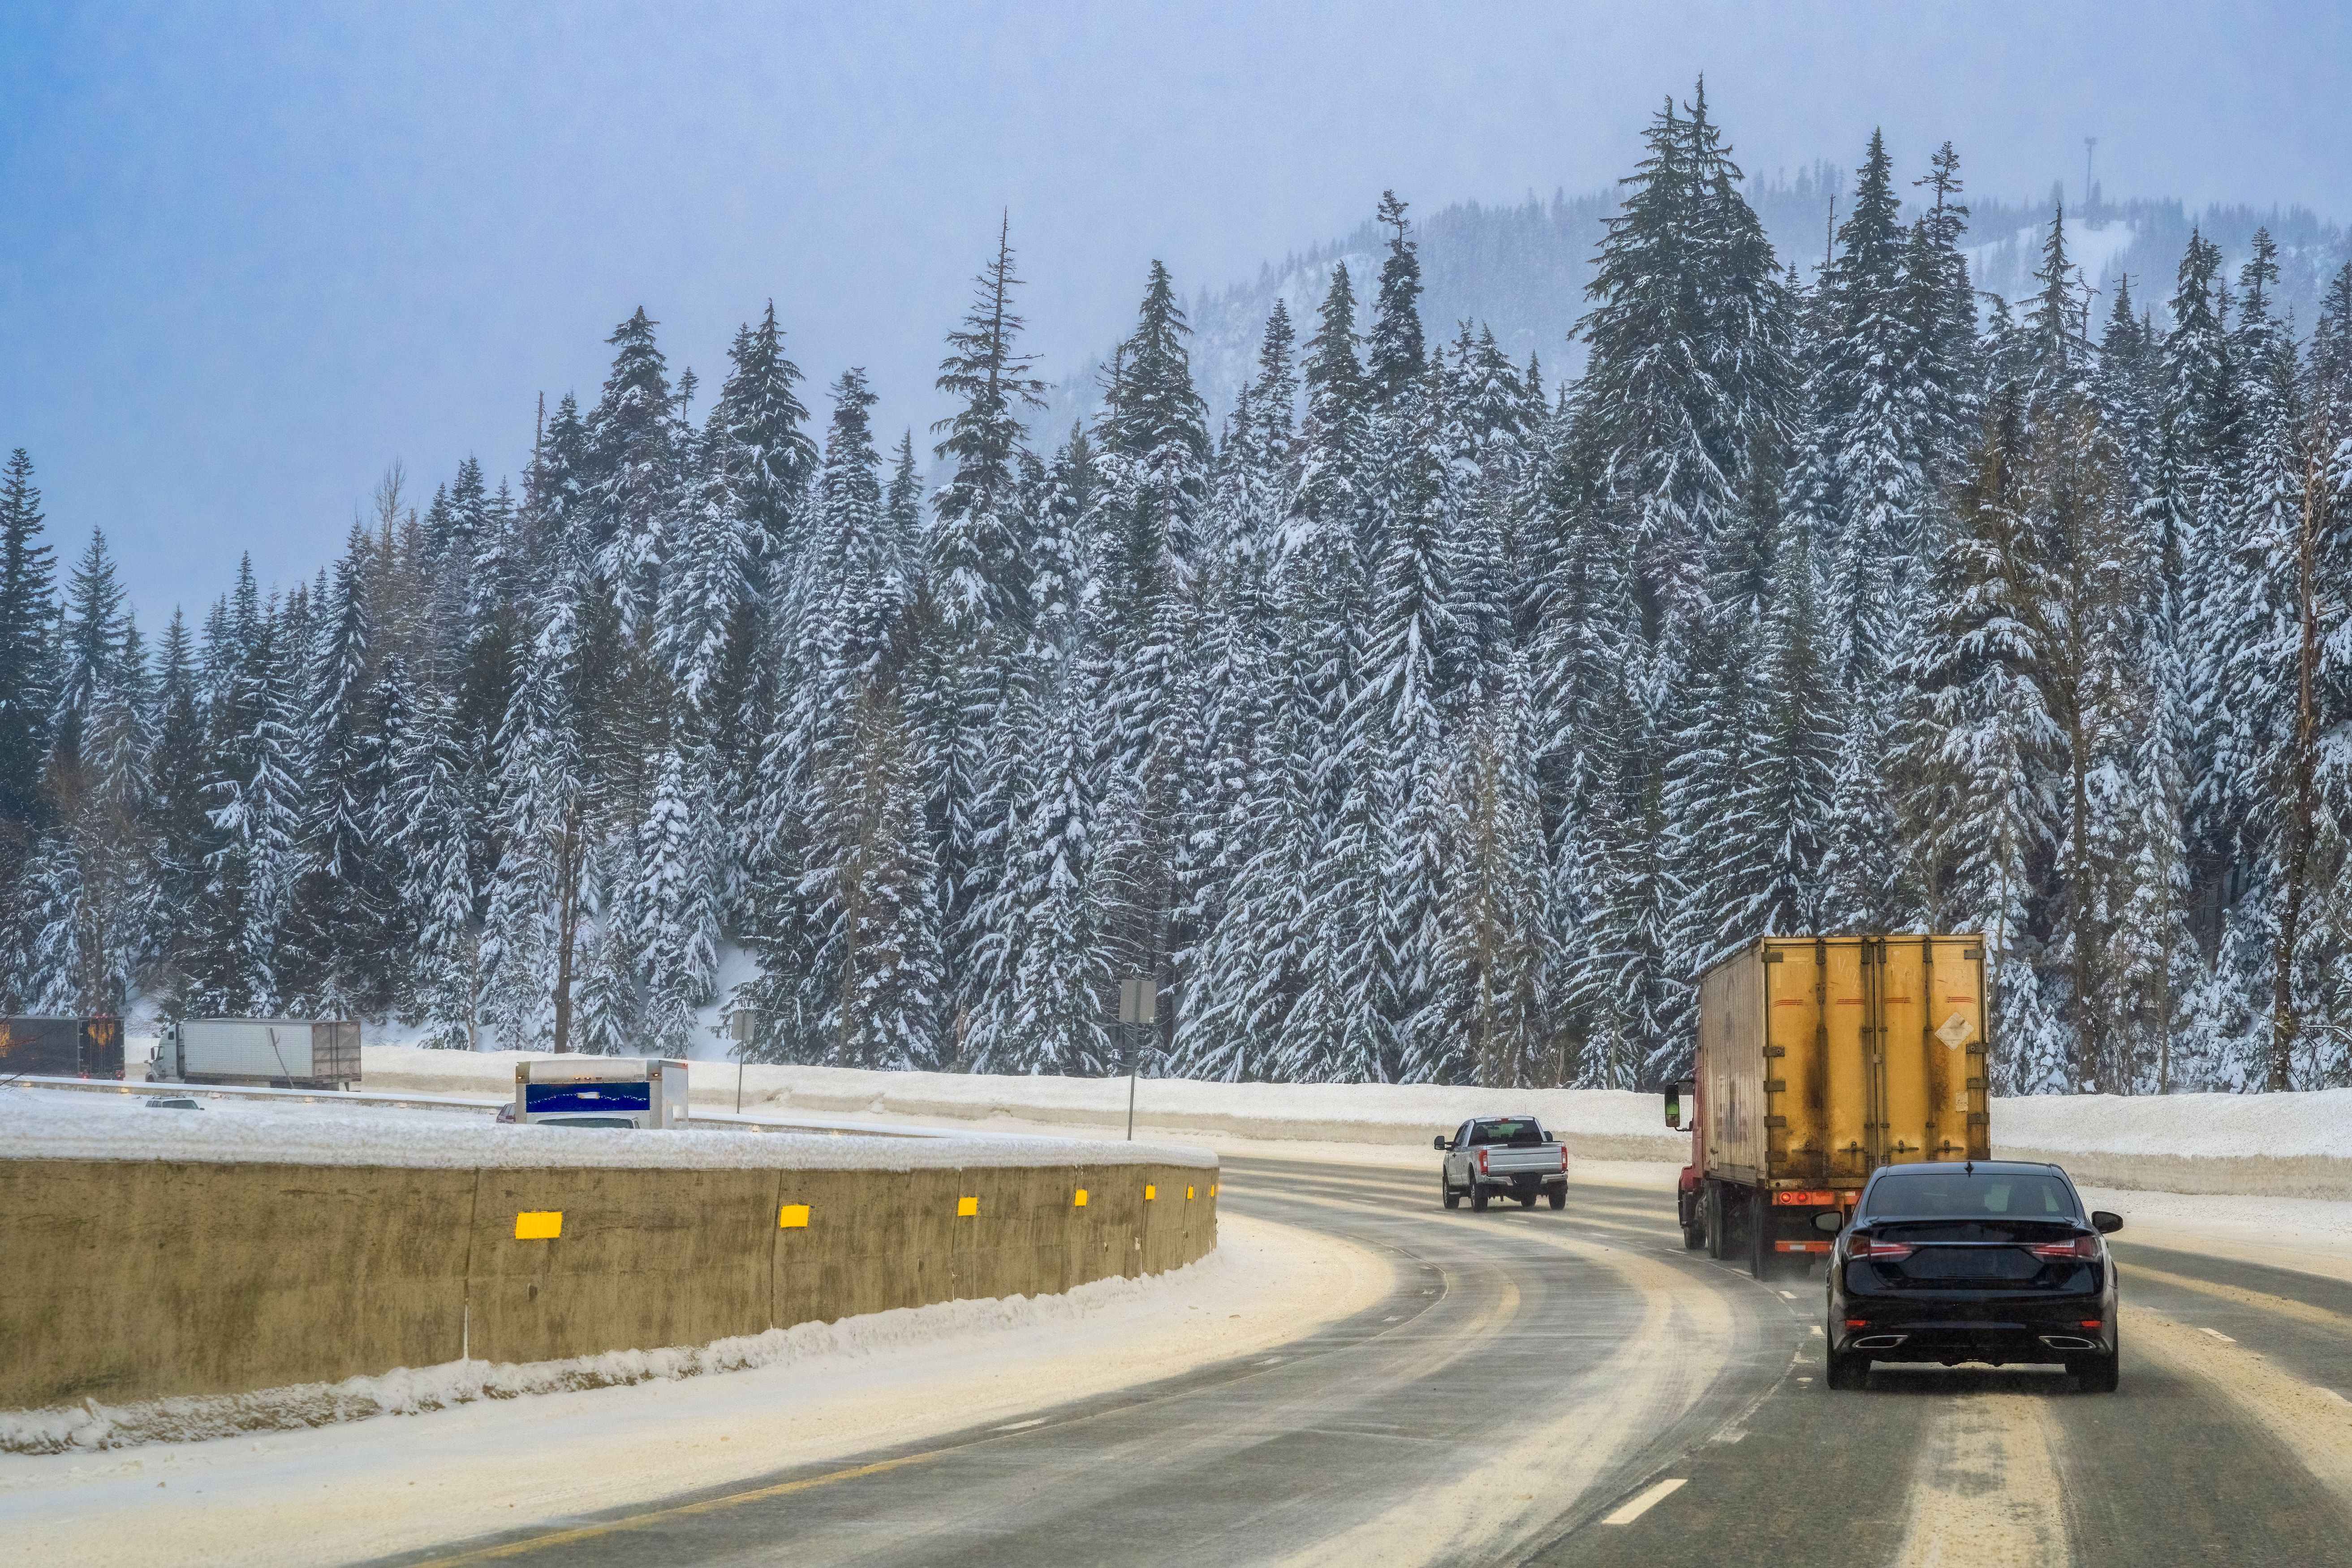 WESTBOUND HIGHWAY I-90 ON SNOQUALMIE PASS IN WASHINGTON STATE DURING A WINTER STORM